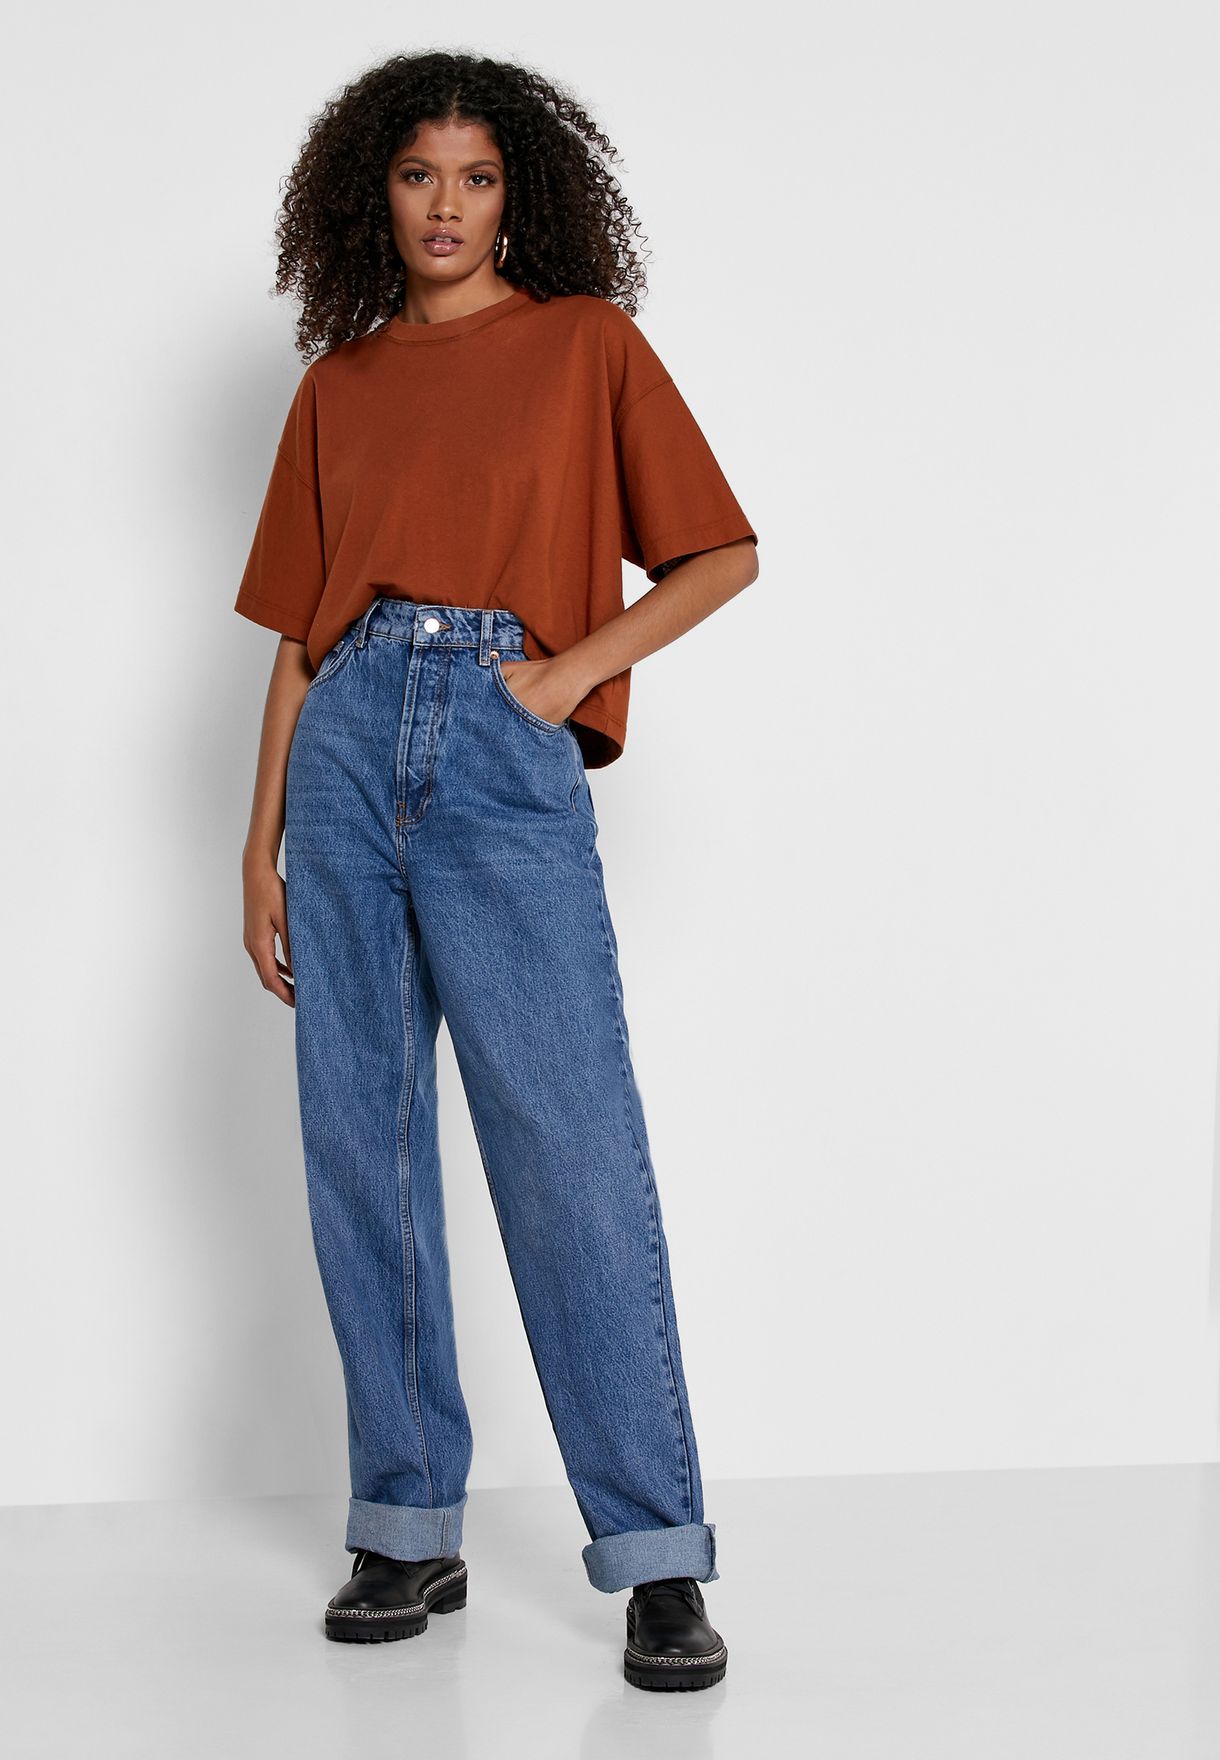 topshop limited edition jeans